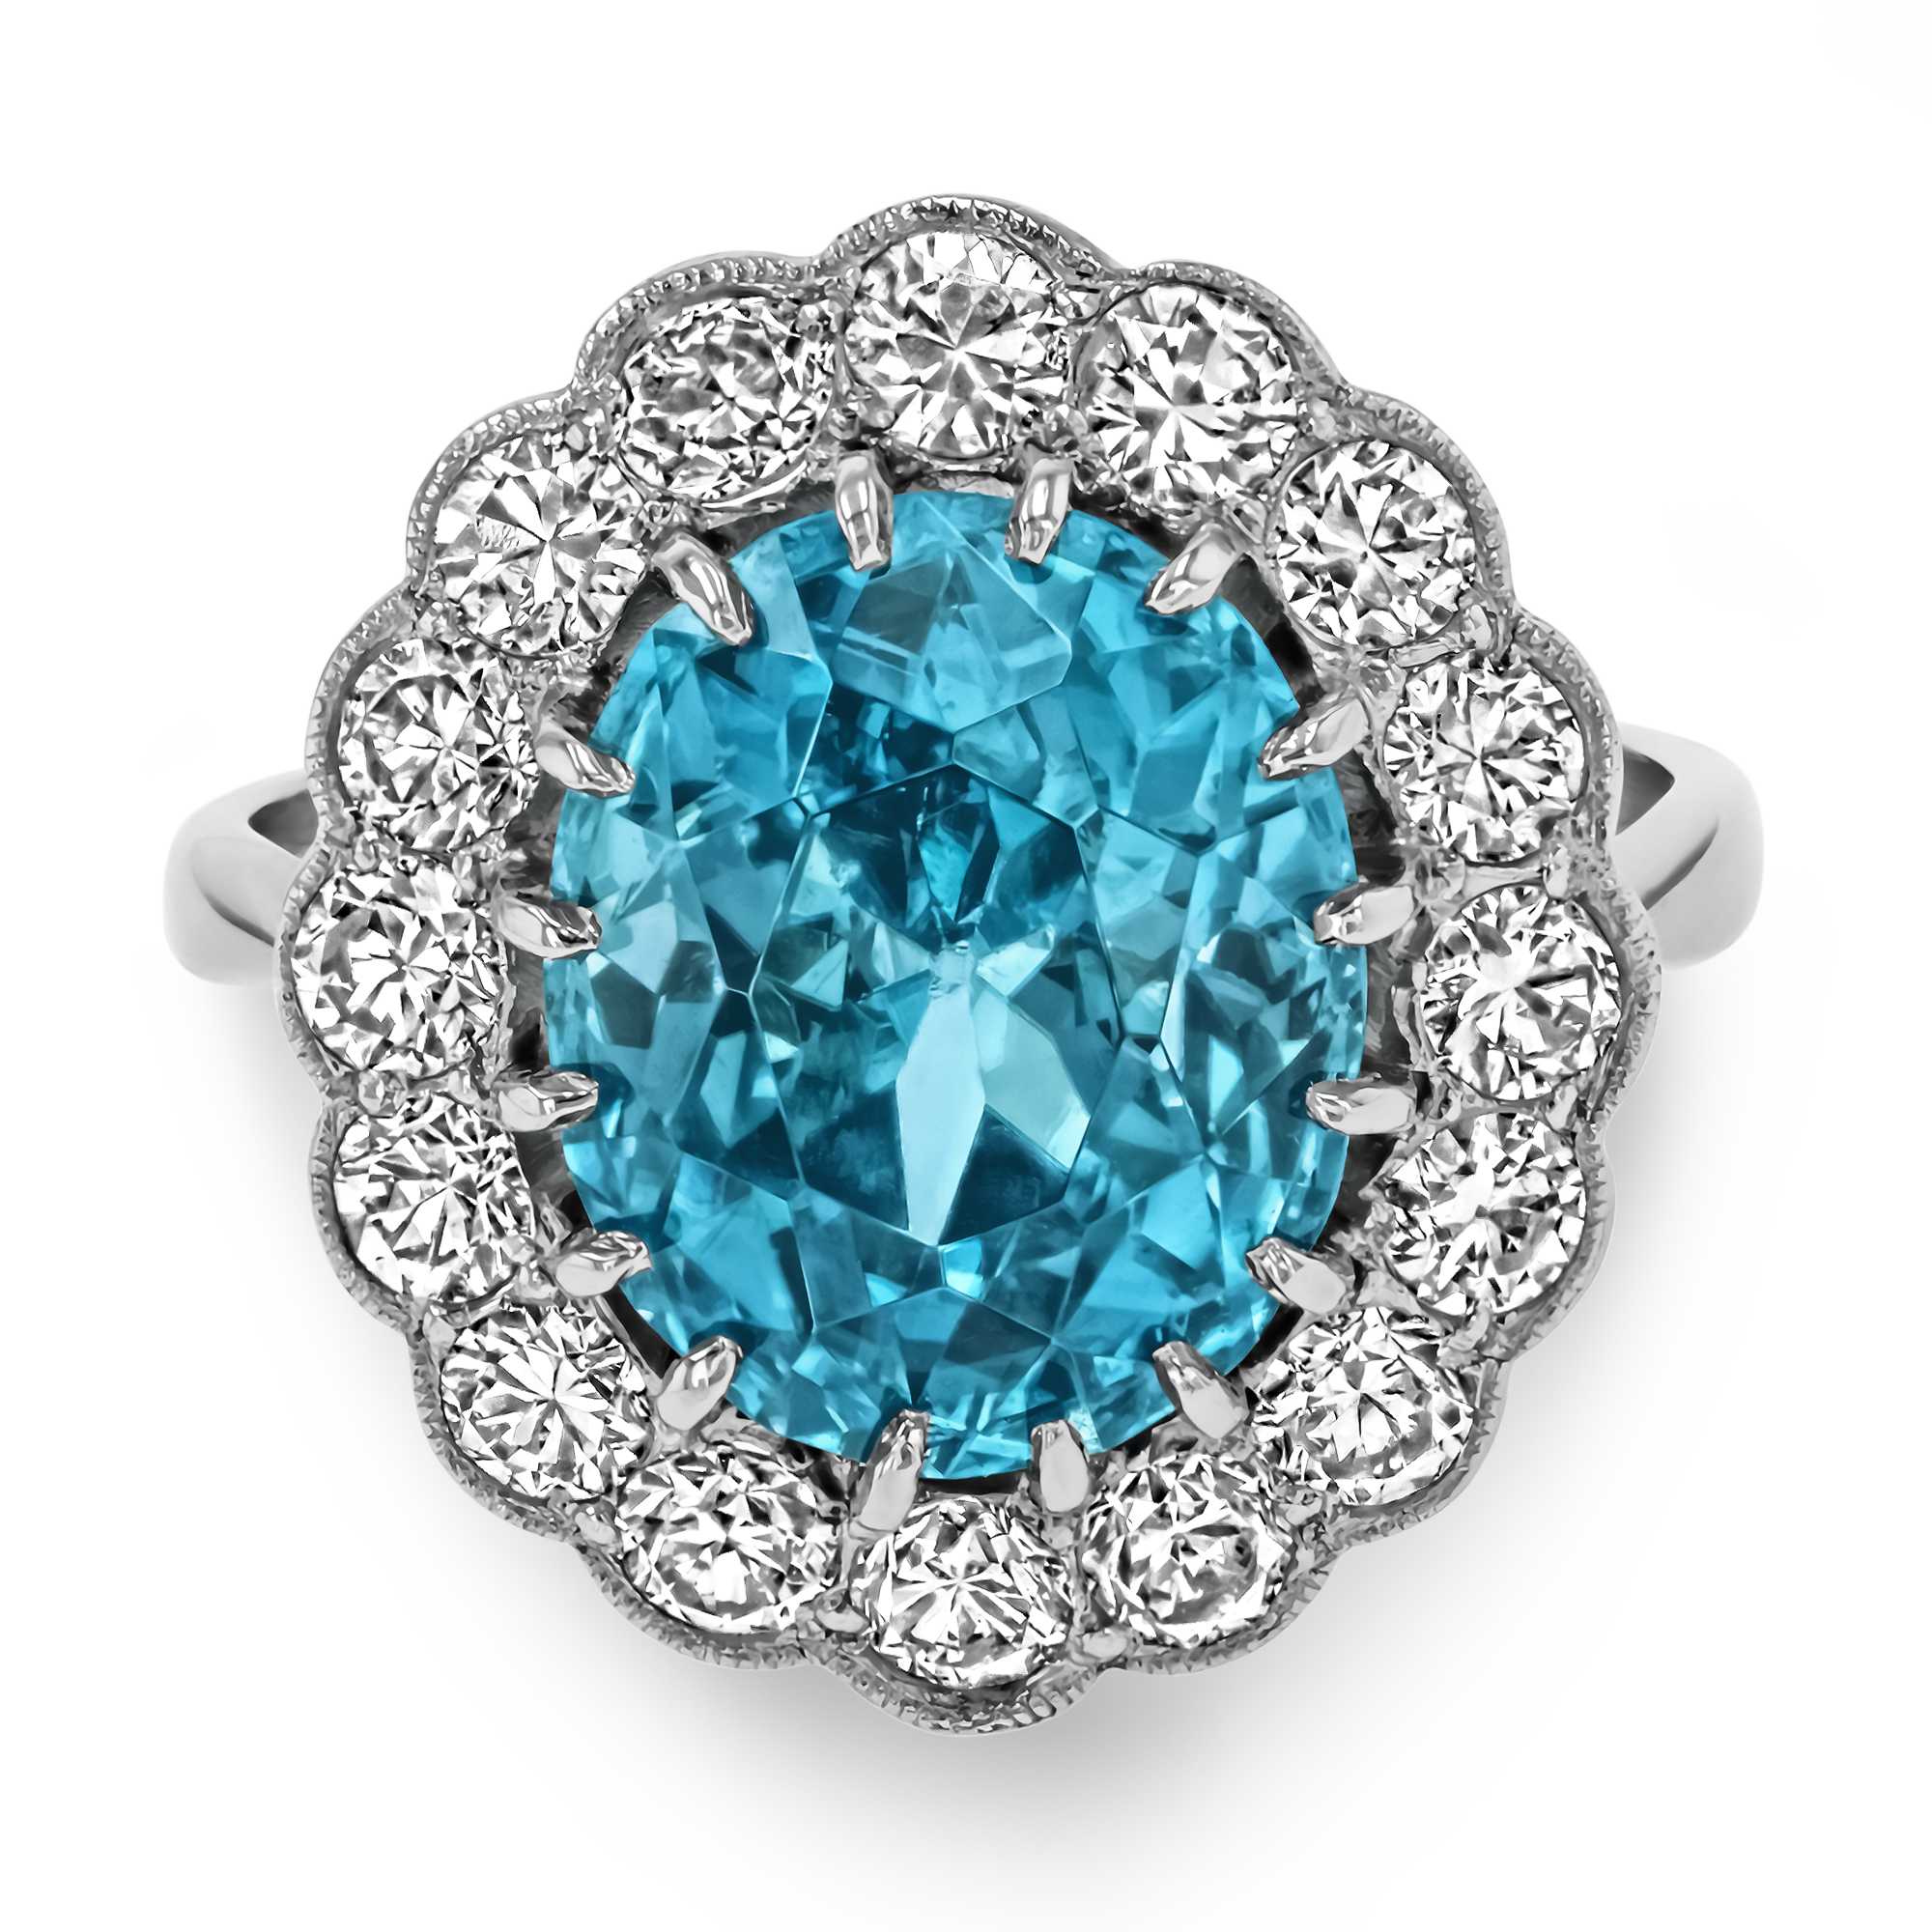 Blue Zircon Cluster Ring with Diamond Surround Oval Cut, Claw Set_2